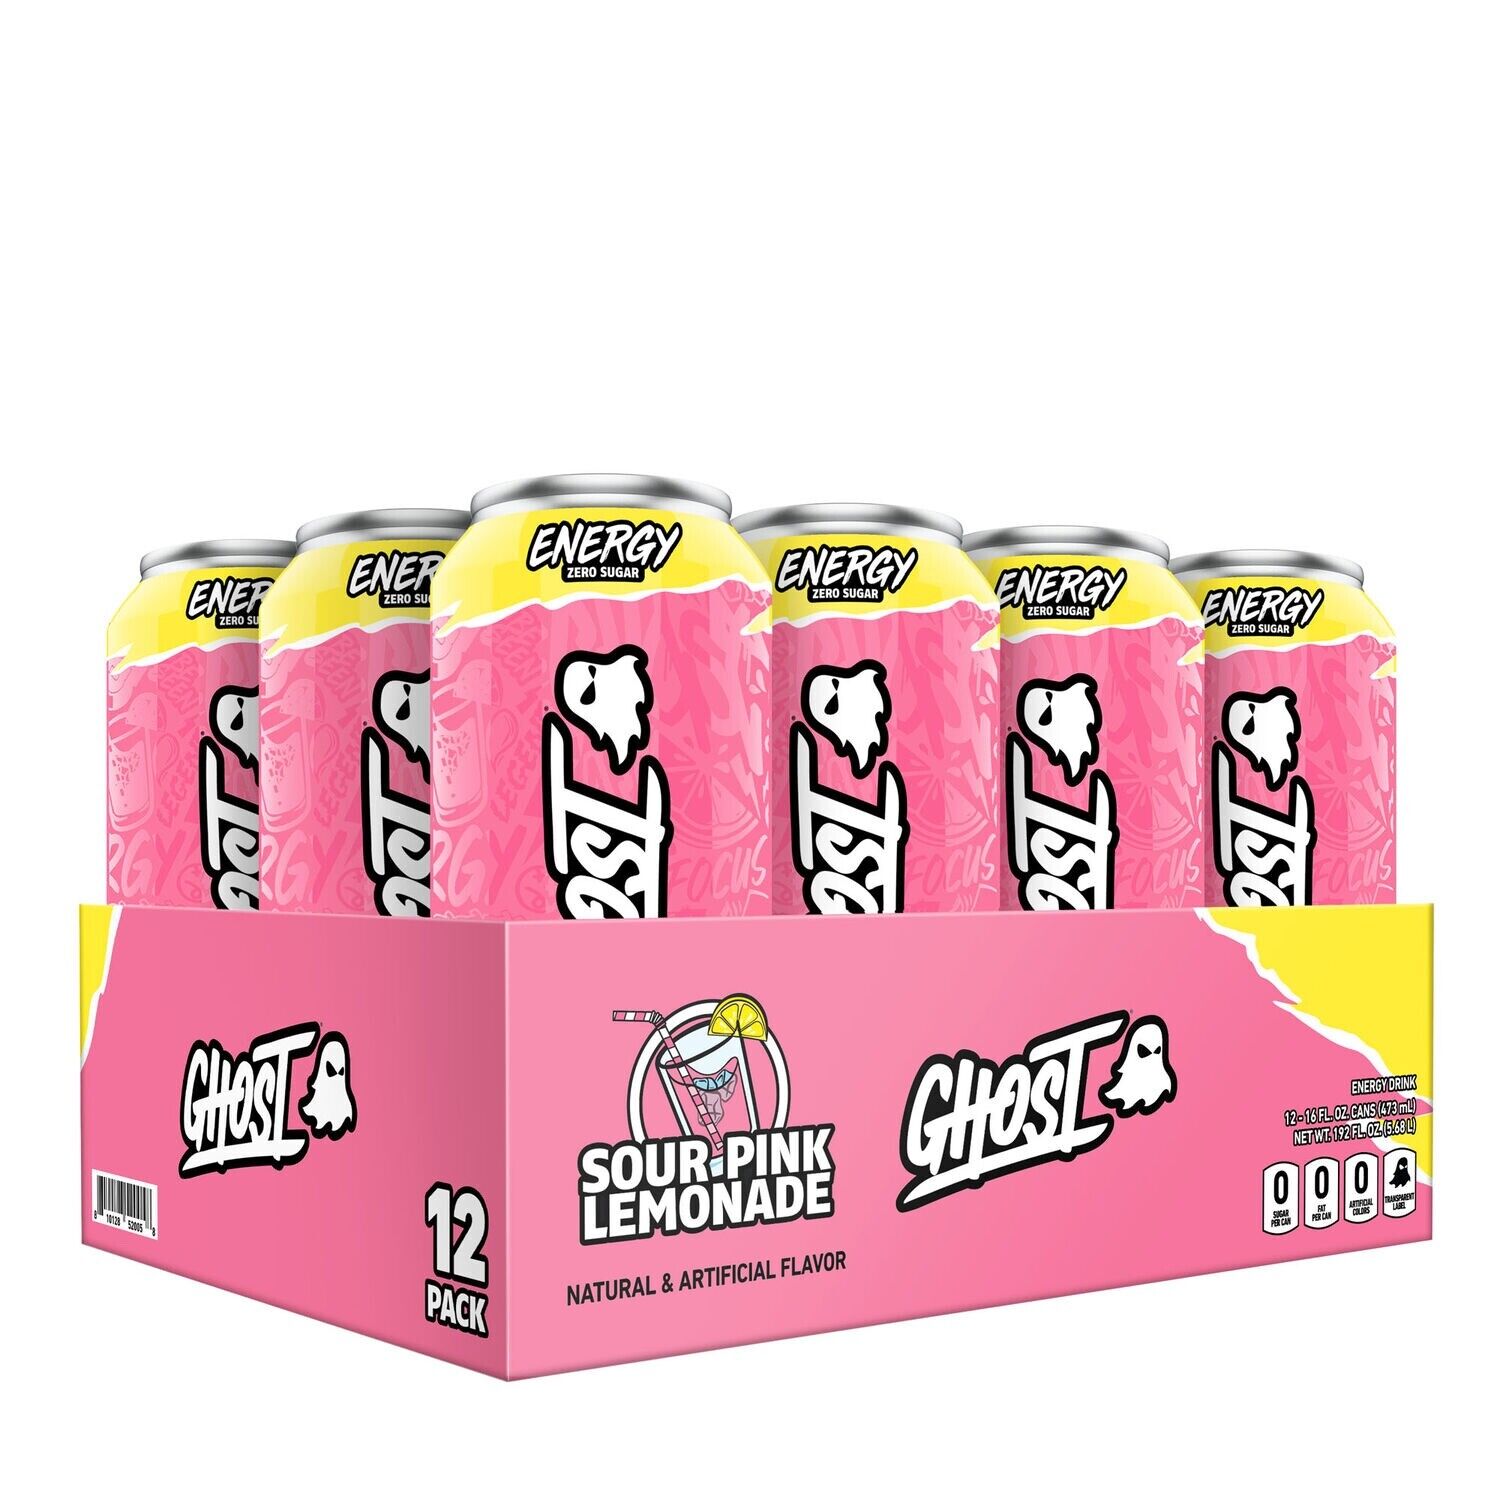 GHOST ENERGY, Sour Pink Lemonade. Limited Edition Flavor